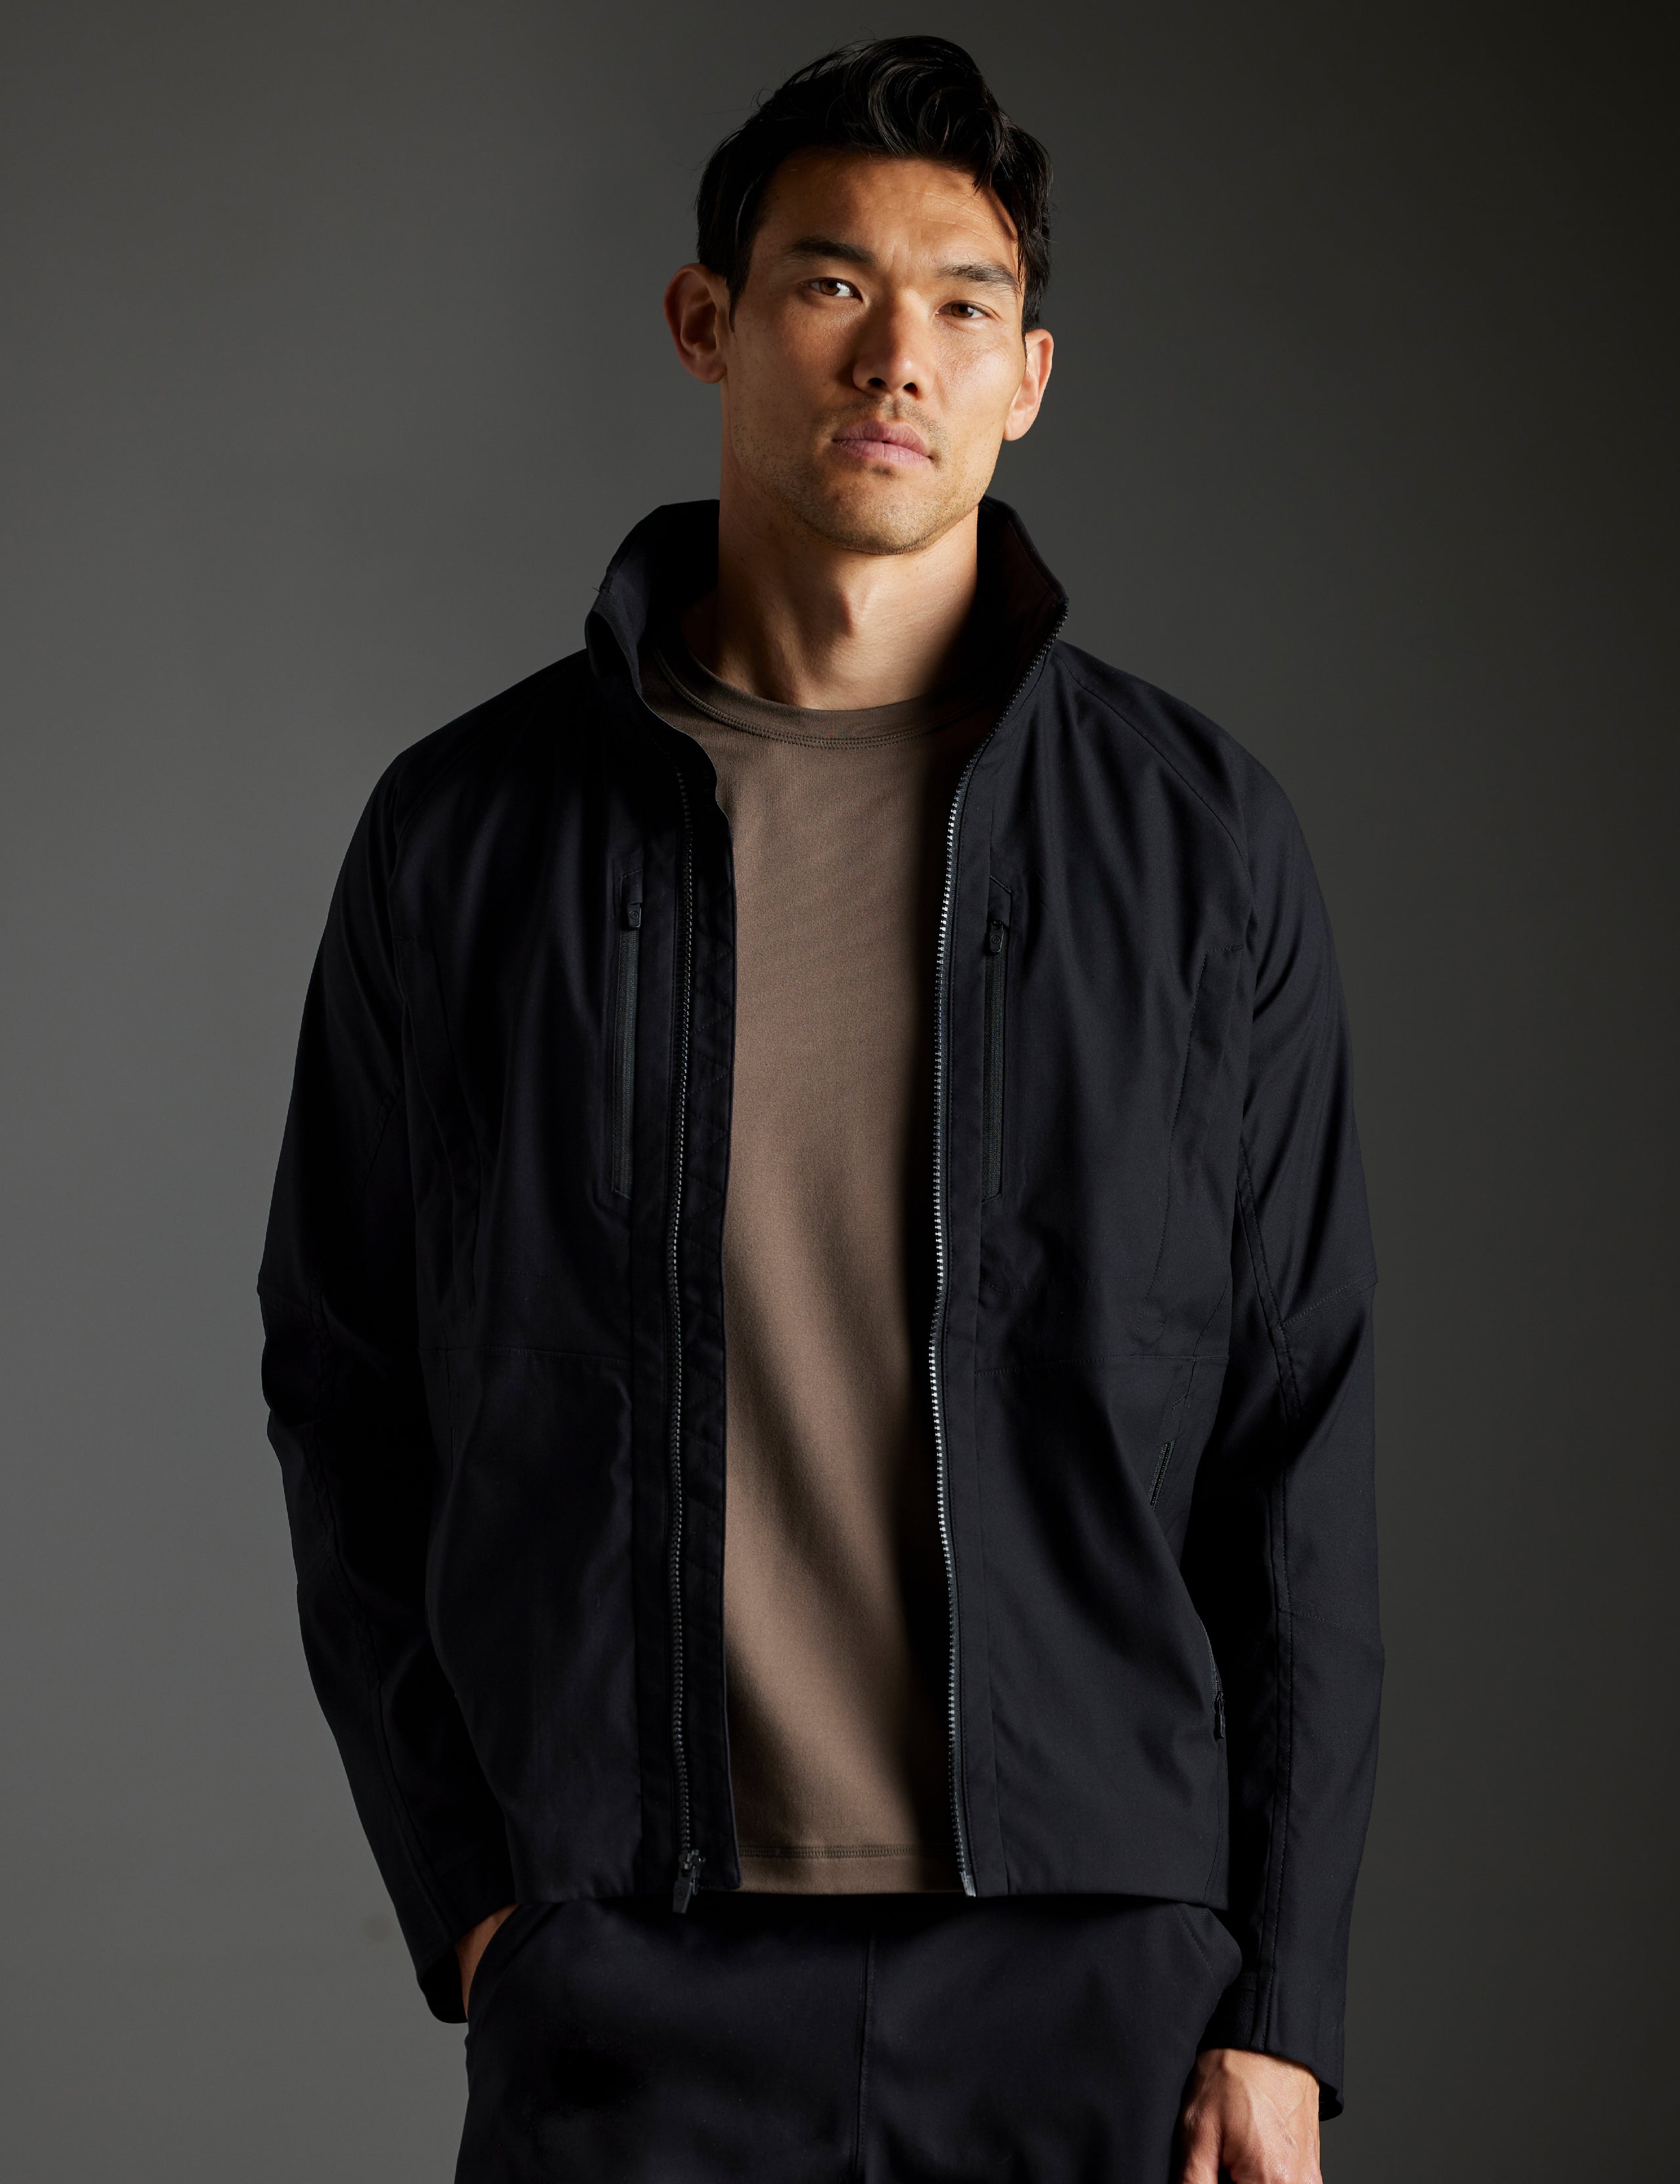 man wearing black jacket from AETHER Apparel